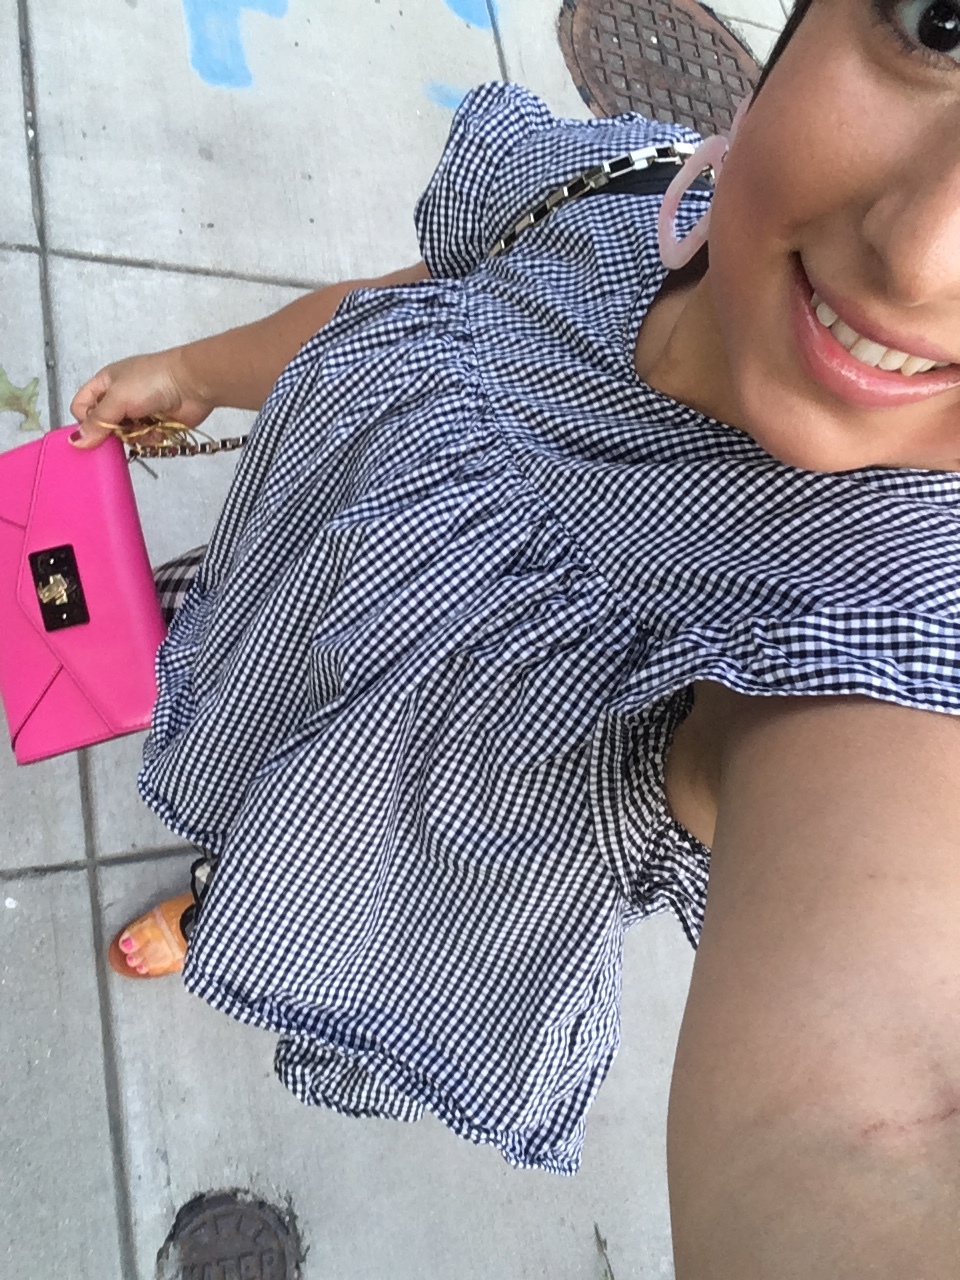 Carolyn's Zara gingham top found at Goodwill in NYC 